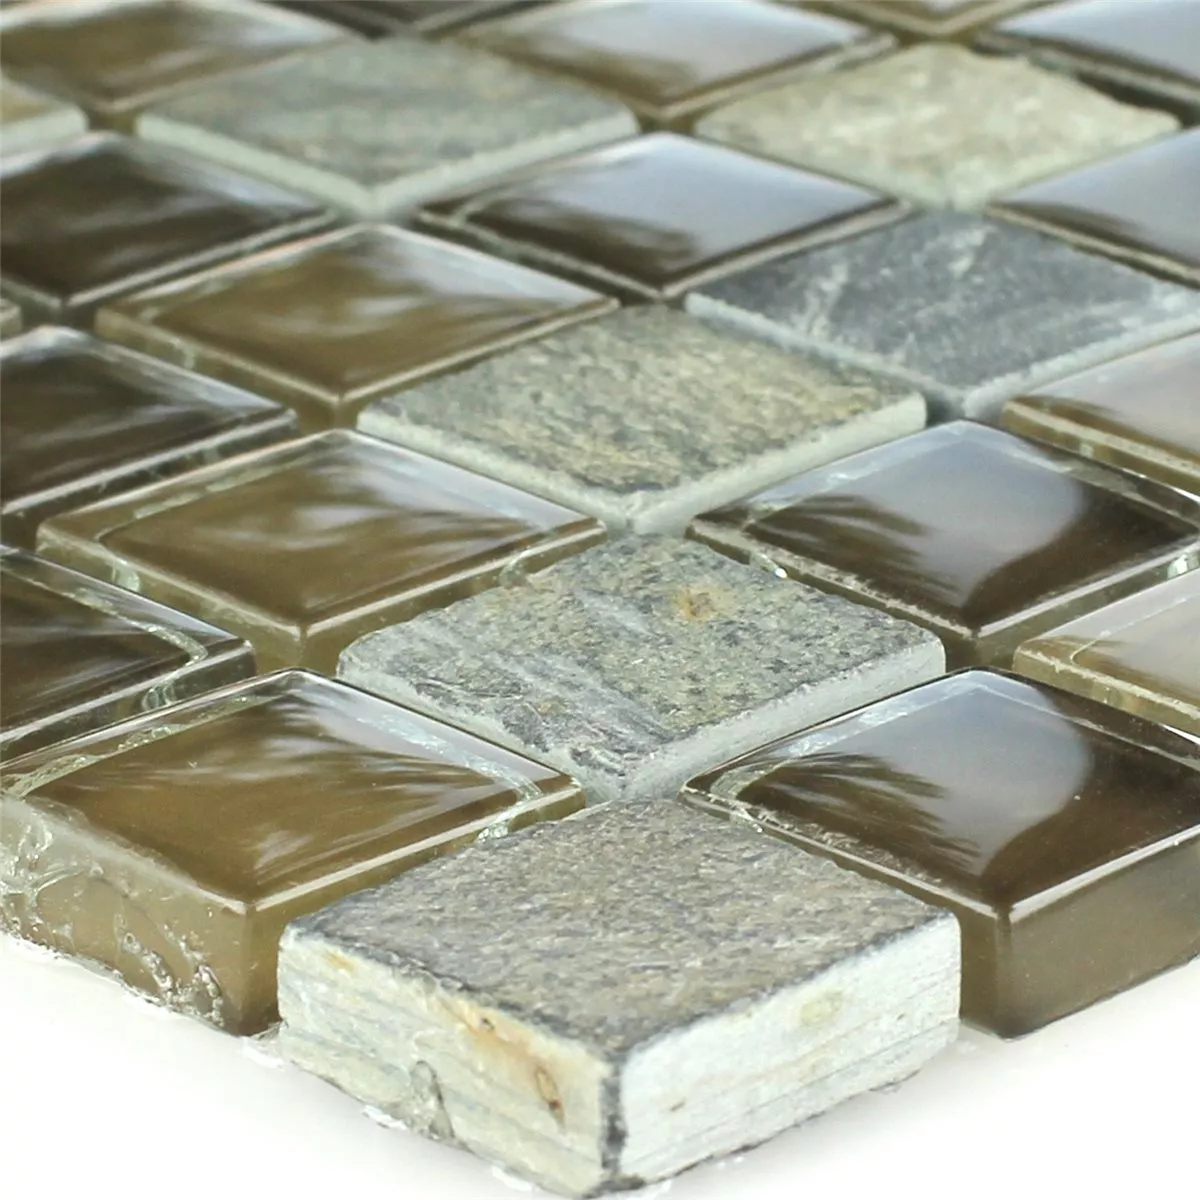 Mosaic Tiles Natural Stone Glass Mocca